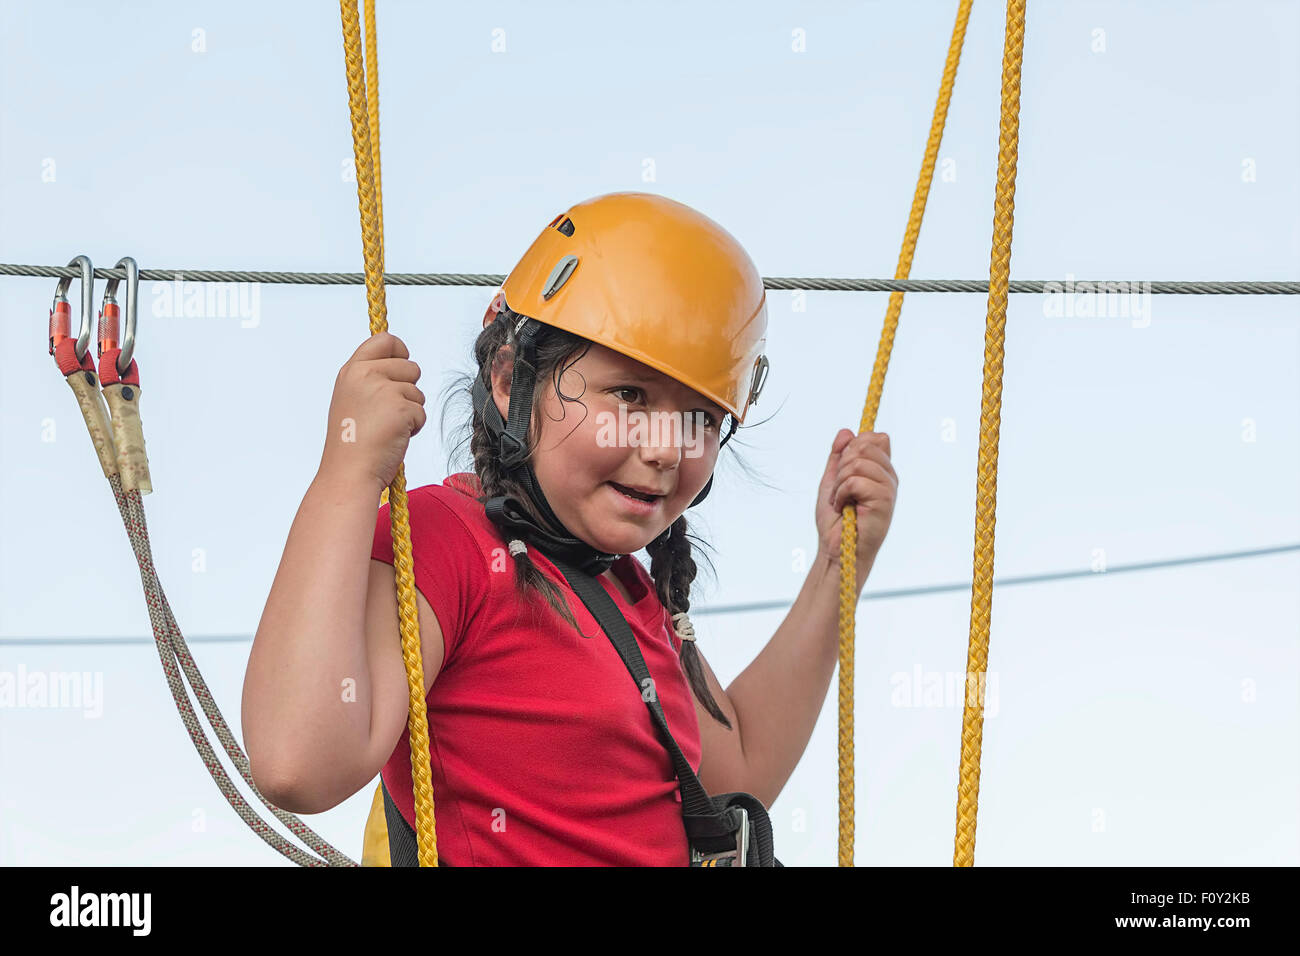 Child girl climbing in adventure park, expressing strong emotion. Stock Photo